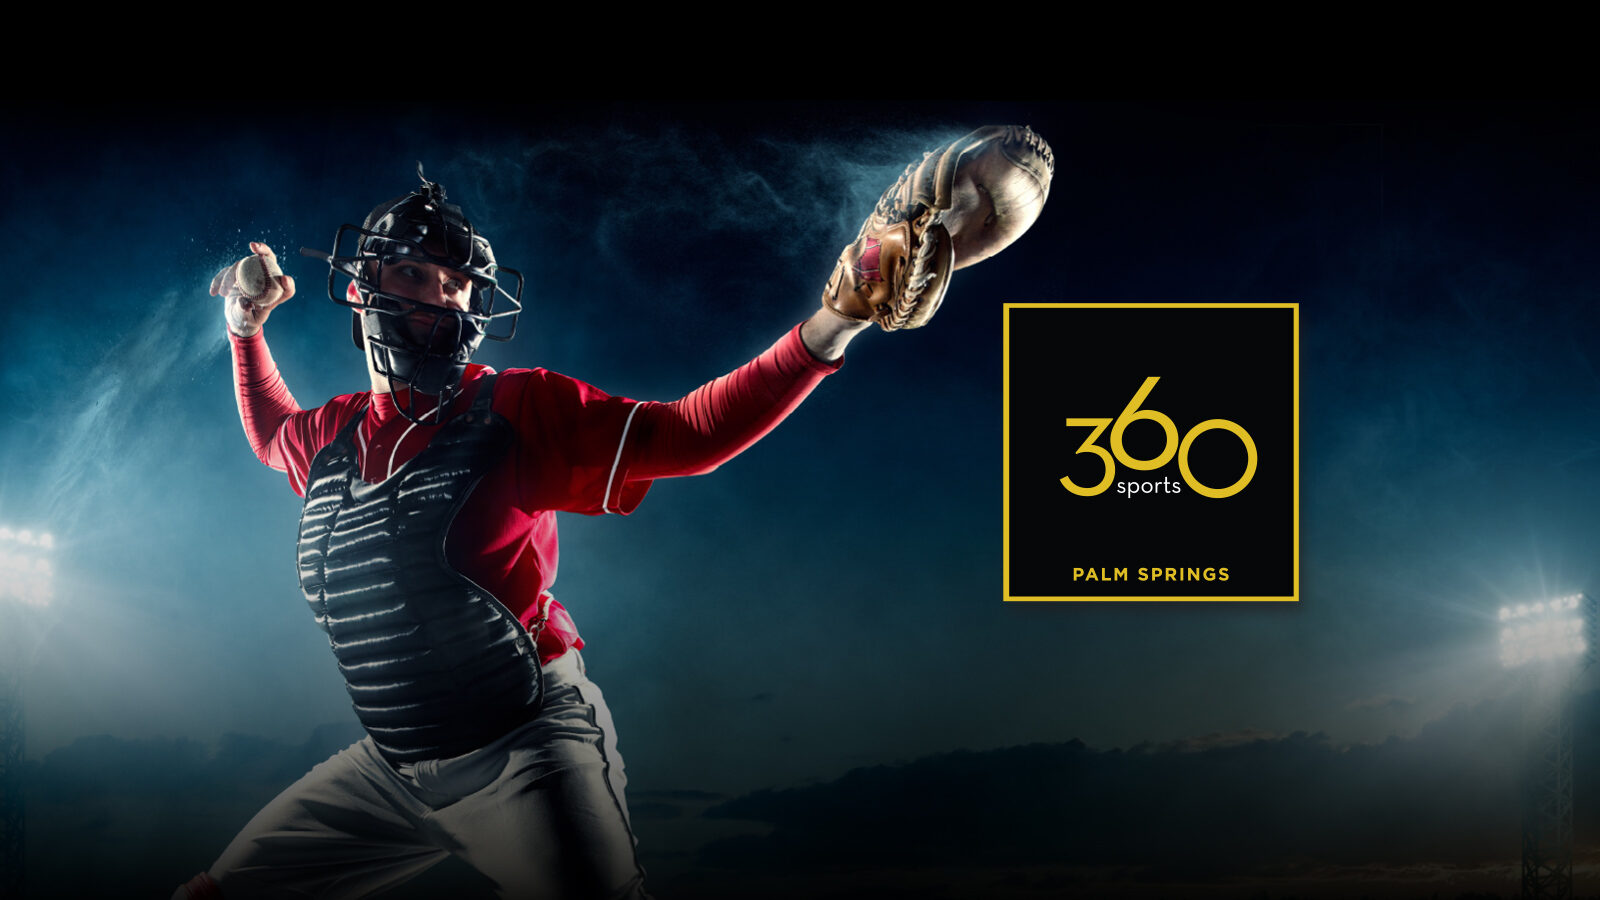 360 Sports July Specials